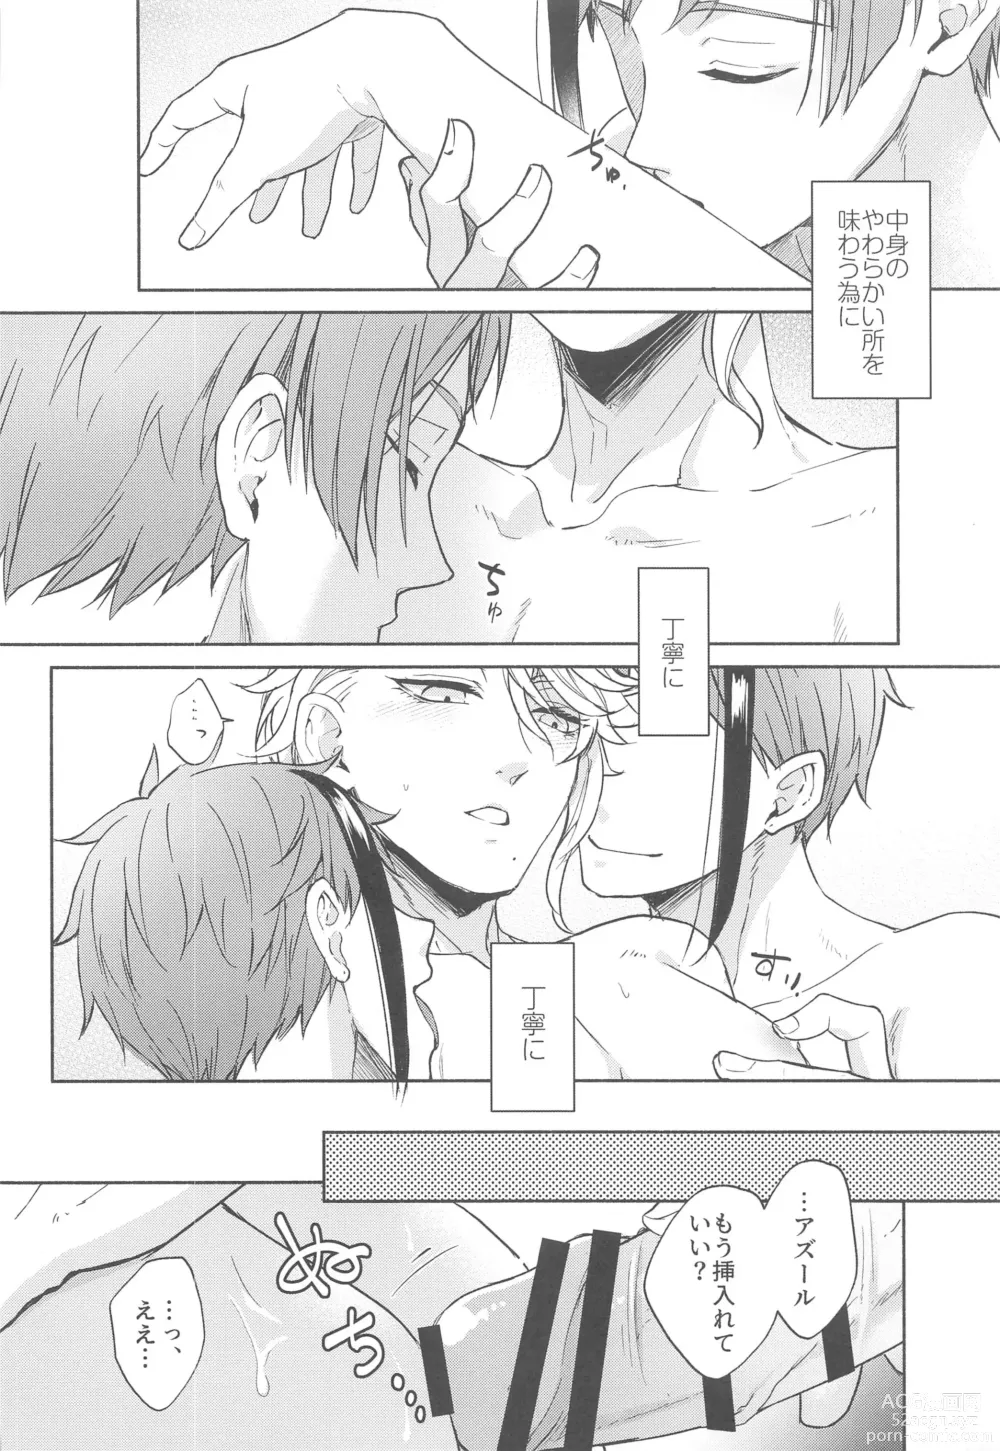 Page 9 of doujinshi More, more, and more